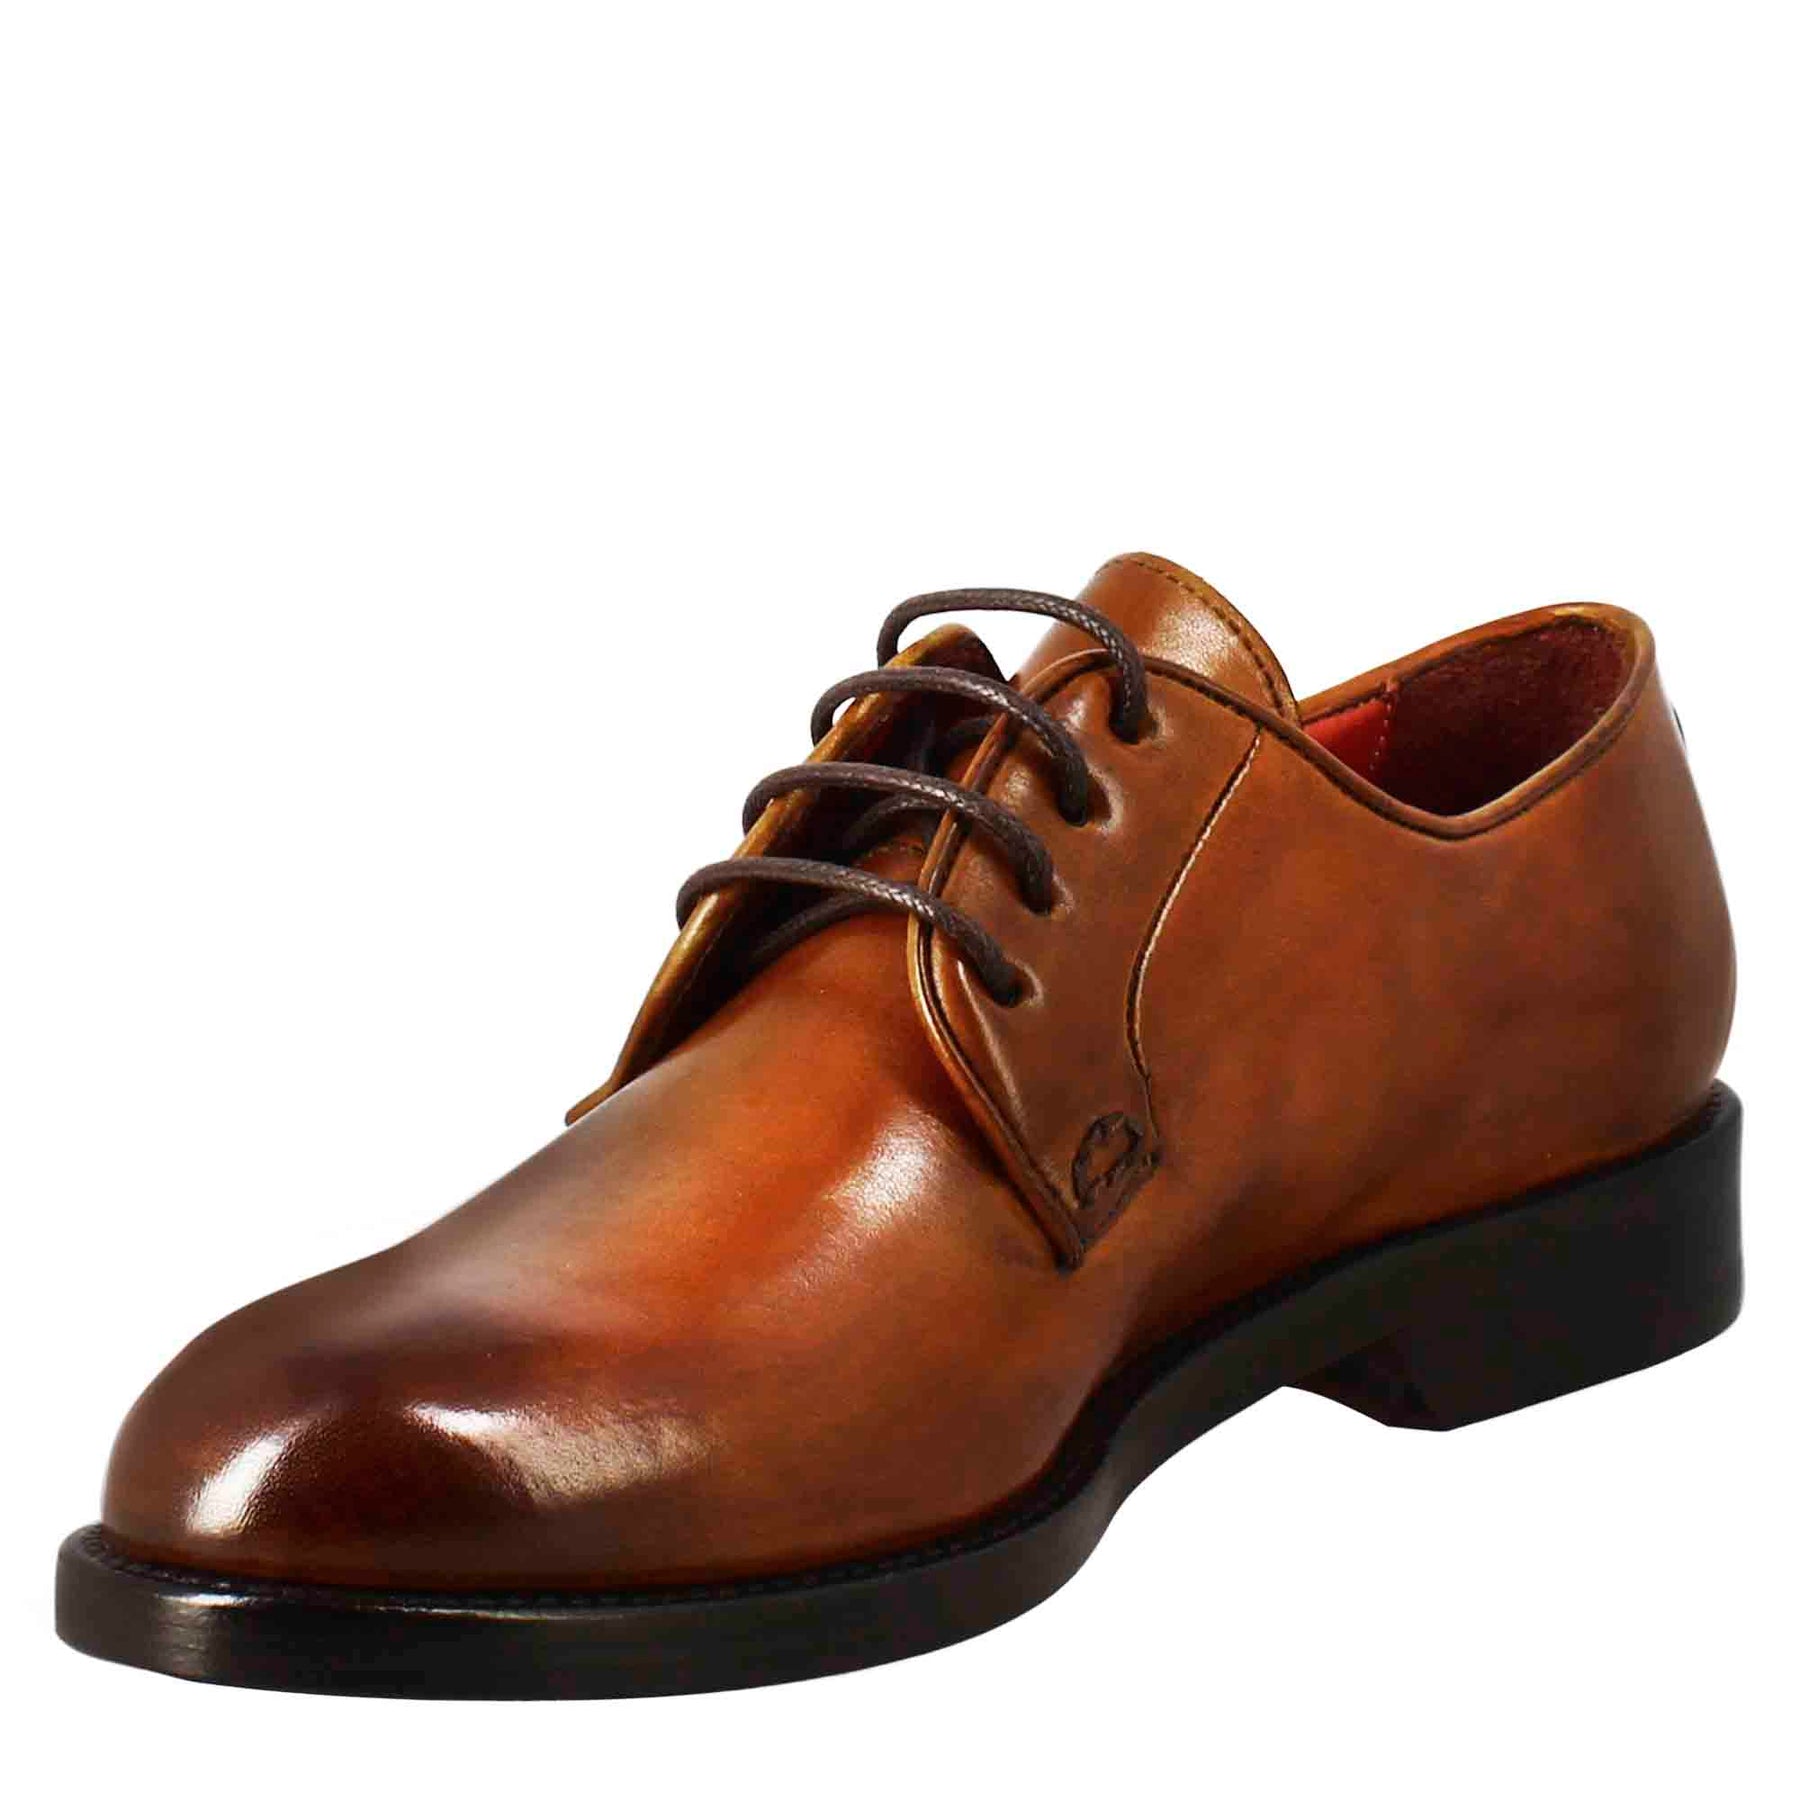 Smooth women's derby in light brown leather